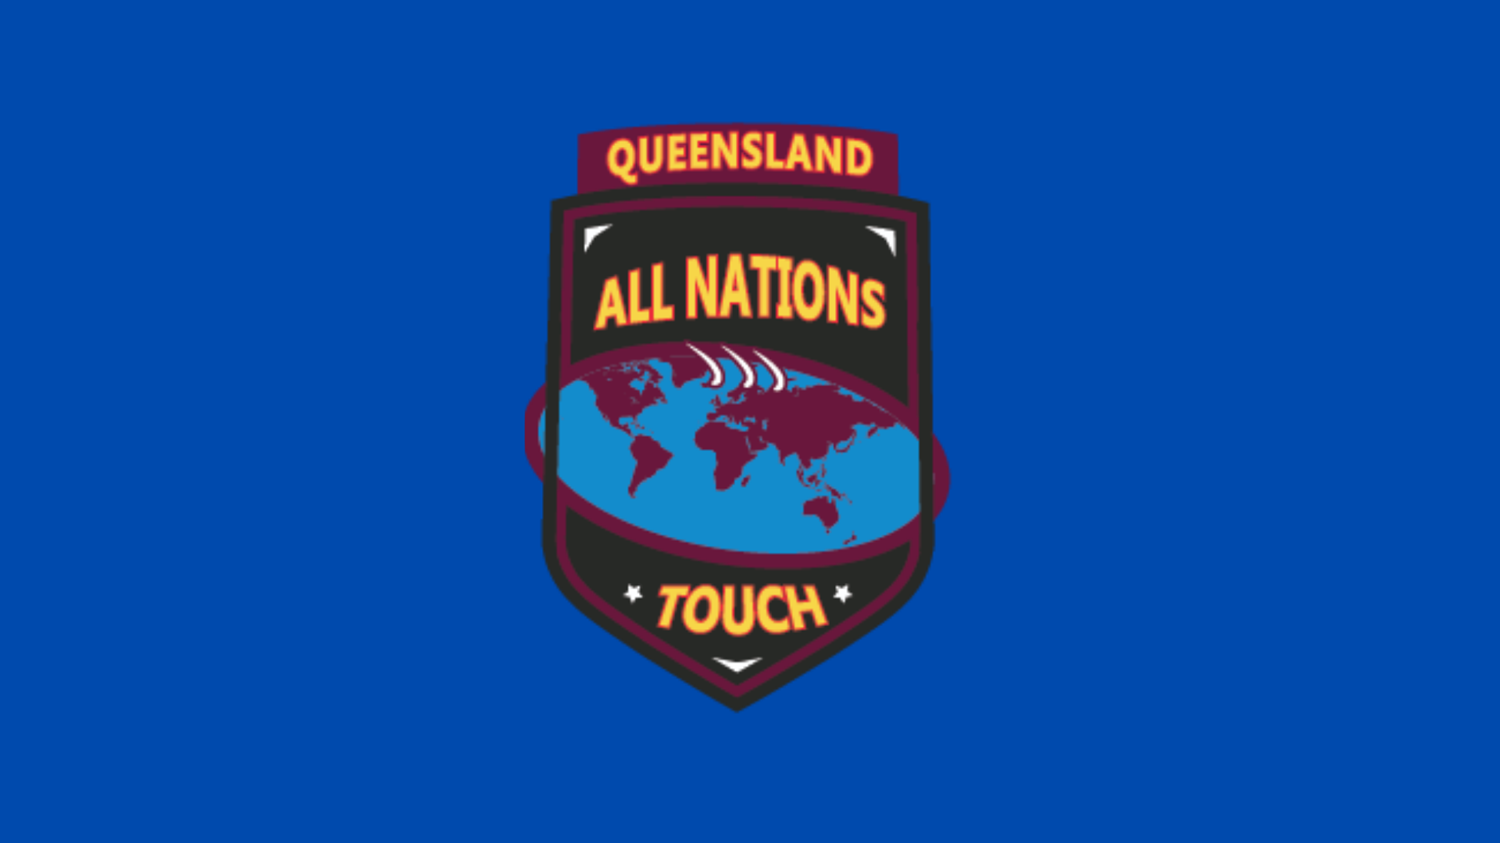 221204-QLD All Nations Masters Mixed - NZ Barbarians v NZ Barbarians Minigame Slate Image